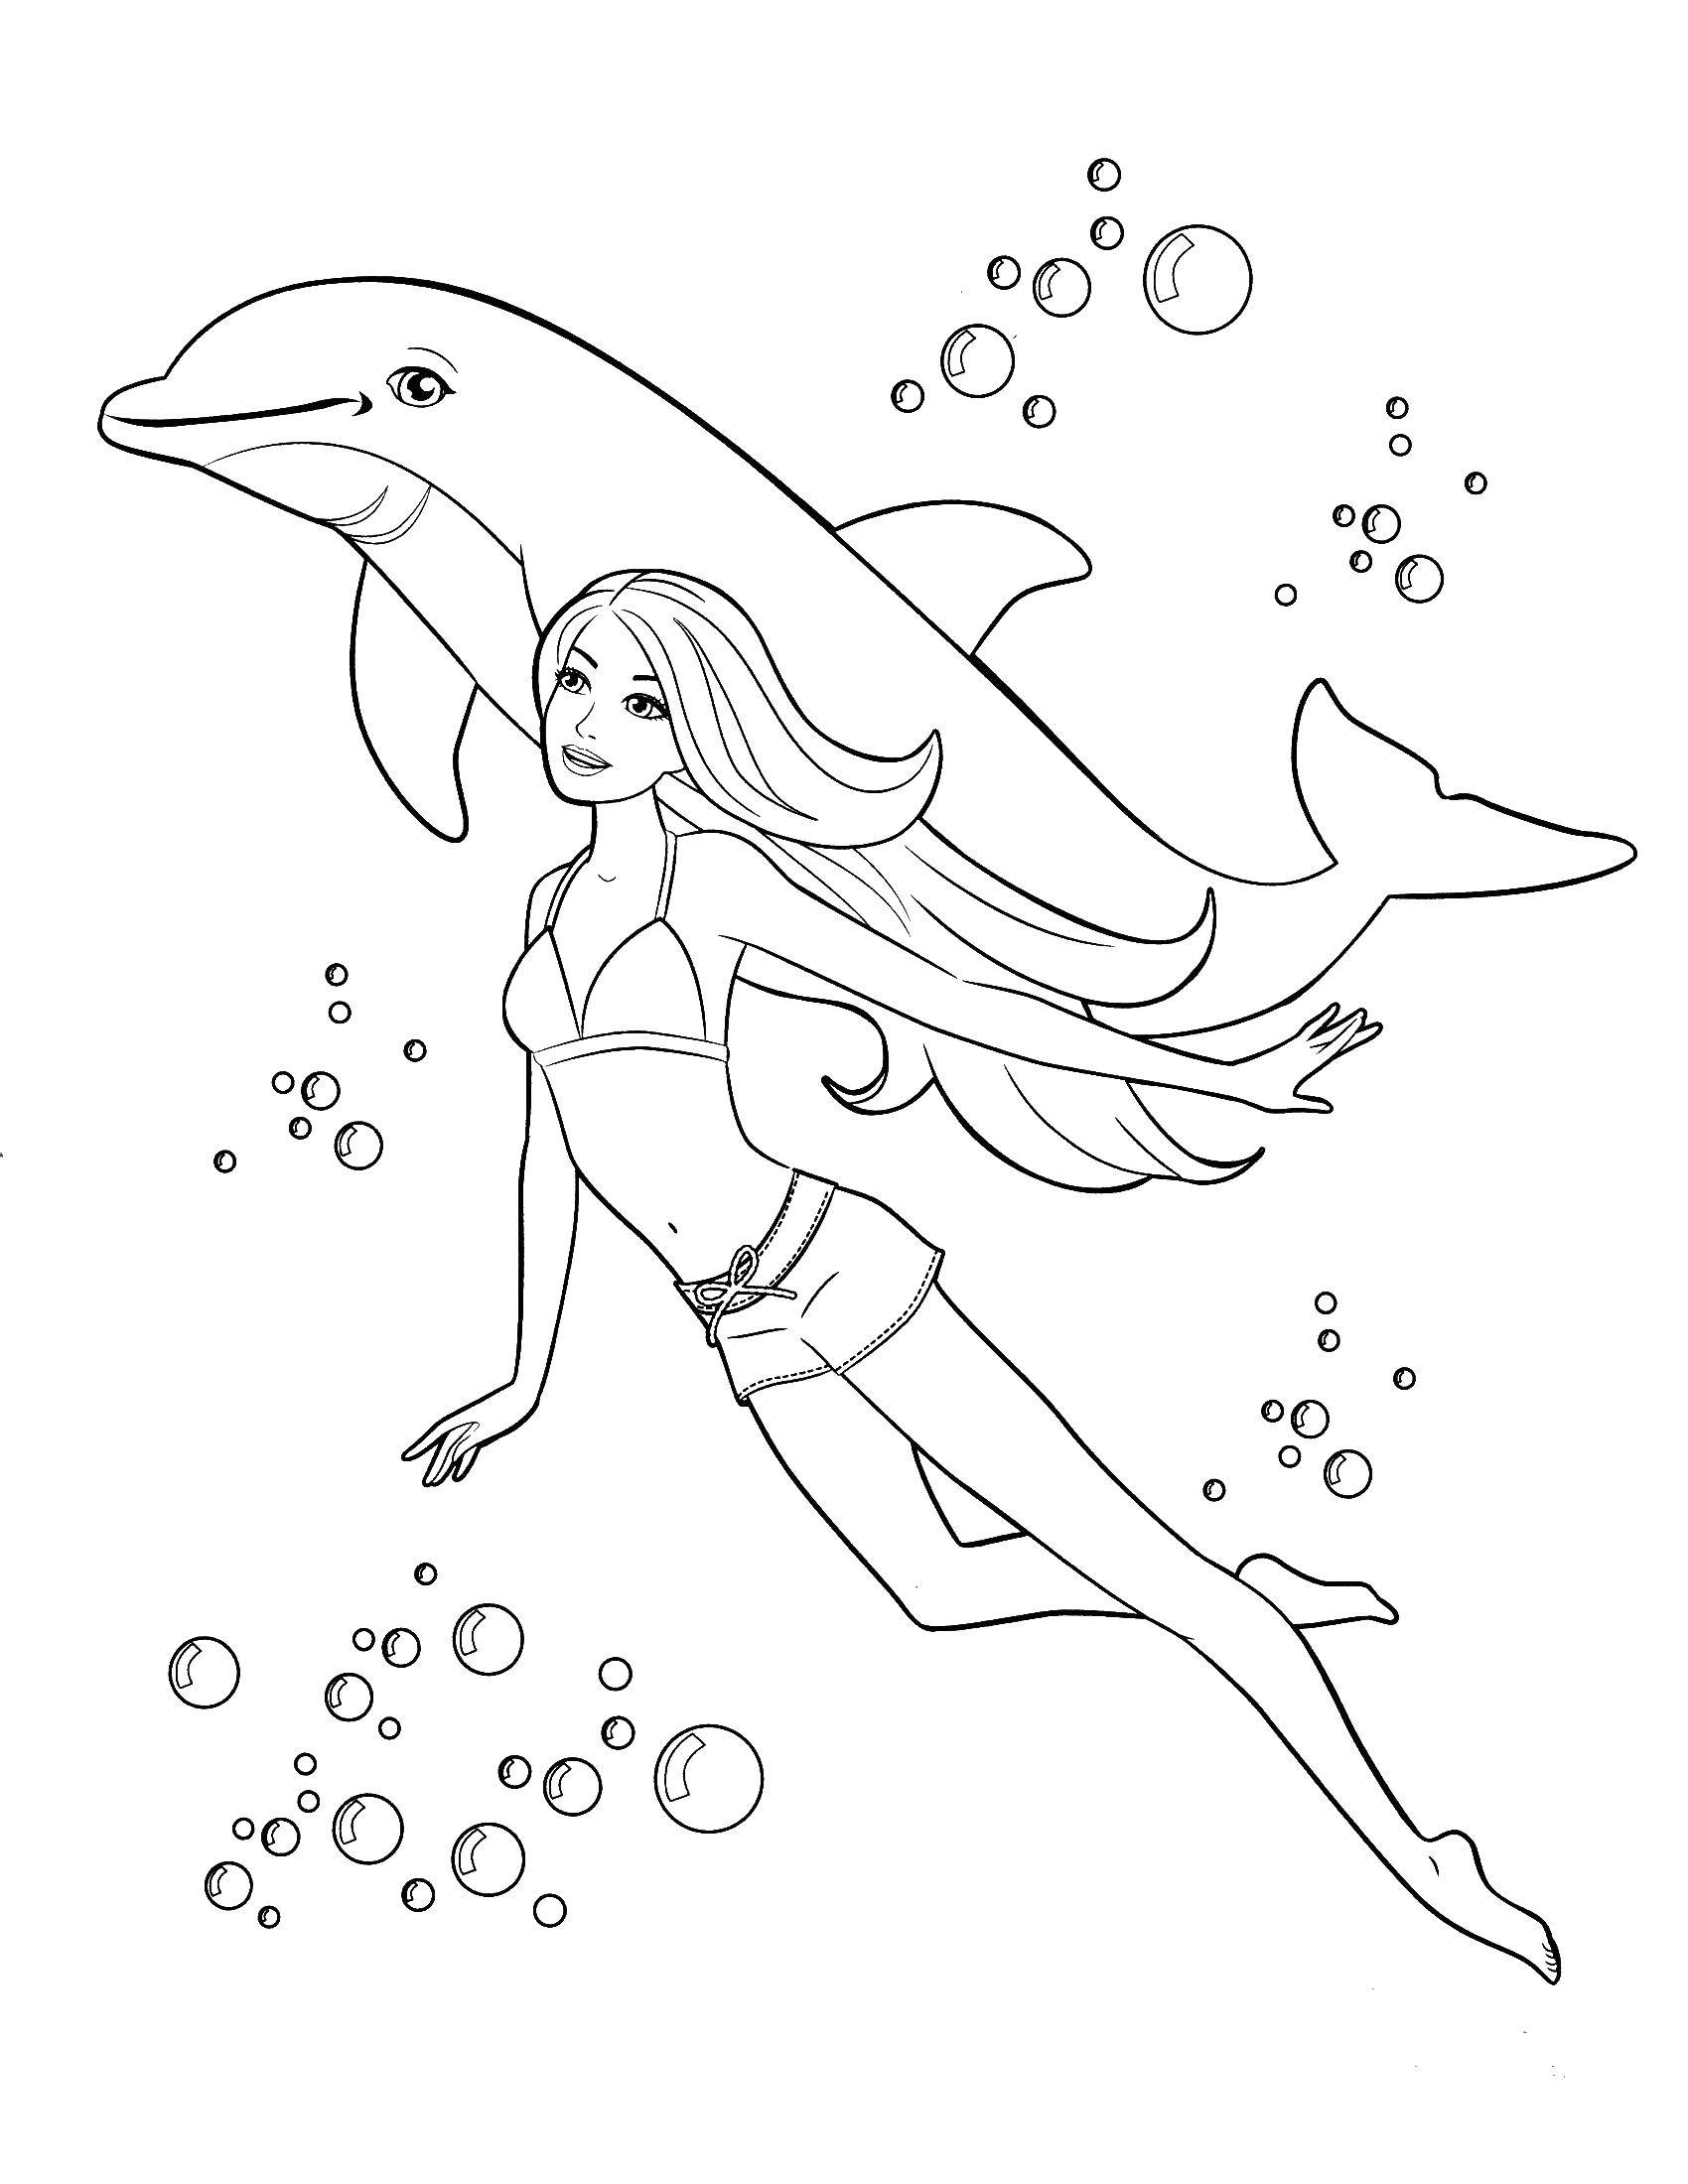 Coloring Barbie with Dolphin. Category Barbie . Tags:  Barbie , girl, doll, Dolphin.